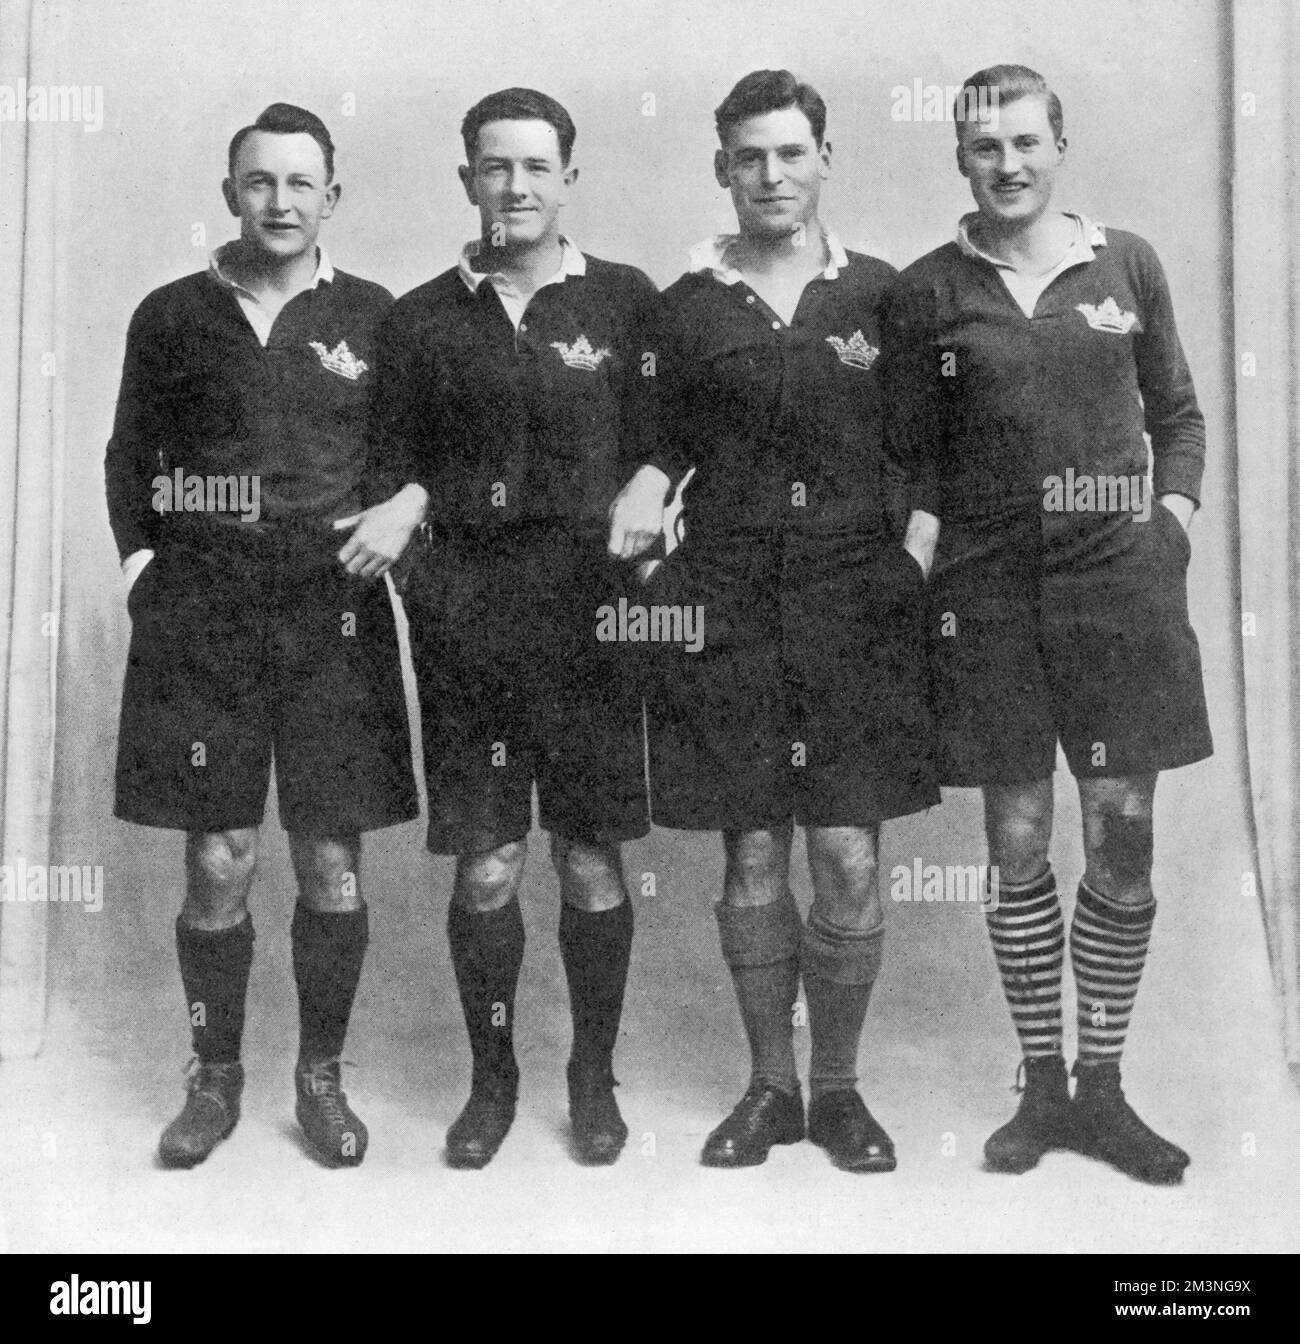 The Scottish rugby union three-quarter line, made up entirely of players from Oxford University, which contributed towards a Scottish grand slam in the Five Nations tournament of 1925. From left to right, A.C.Wallace, G.G.Aitken, G.P.S.Macpherson and I.S.Smith. Macpherson was unable to play in the fixture against Ireland in Dublin, due to an injury, and his place was taken by J.C.Dykes     Date: 1925 Stock Photo